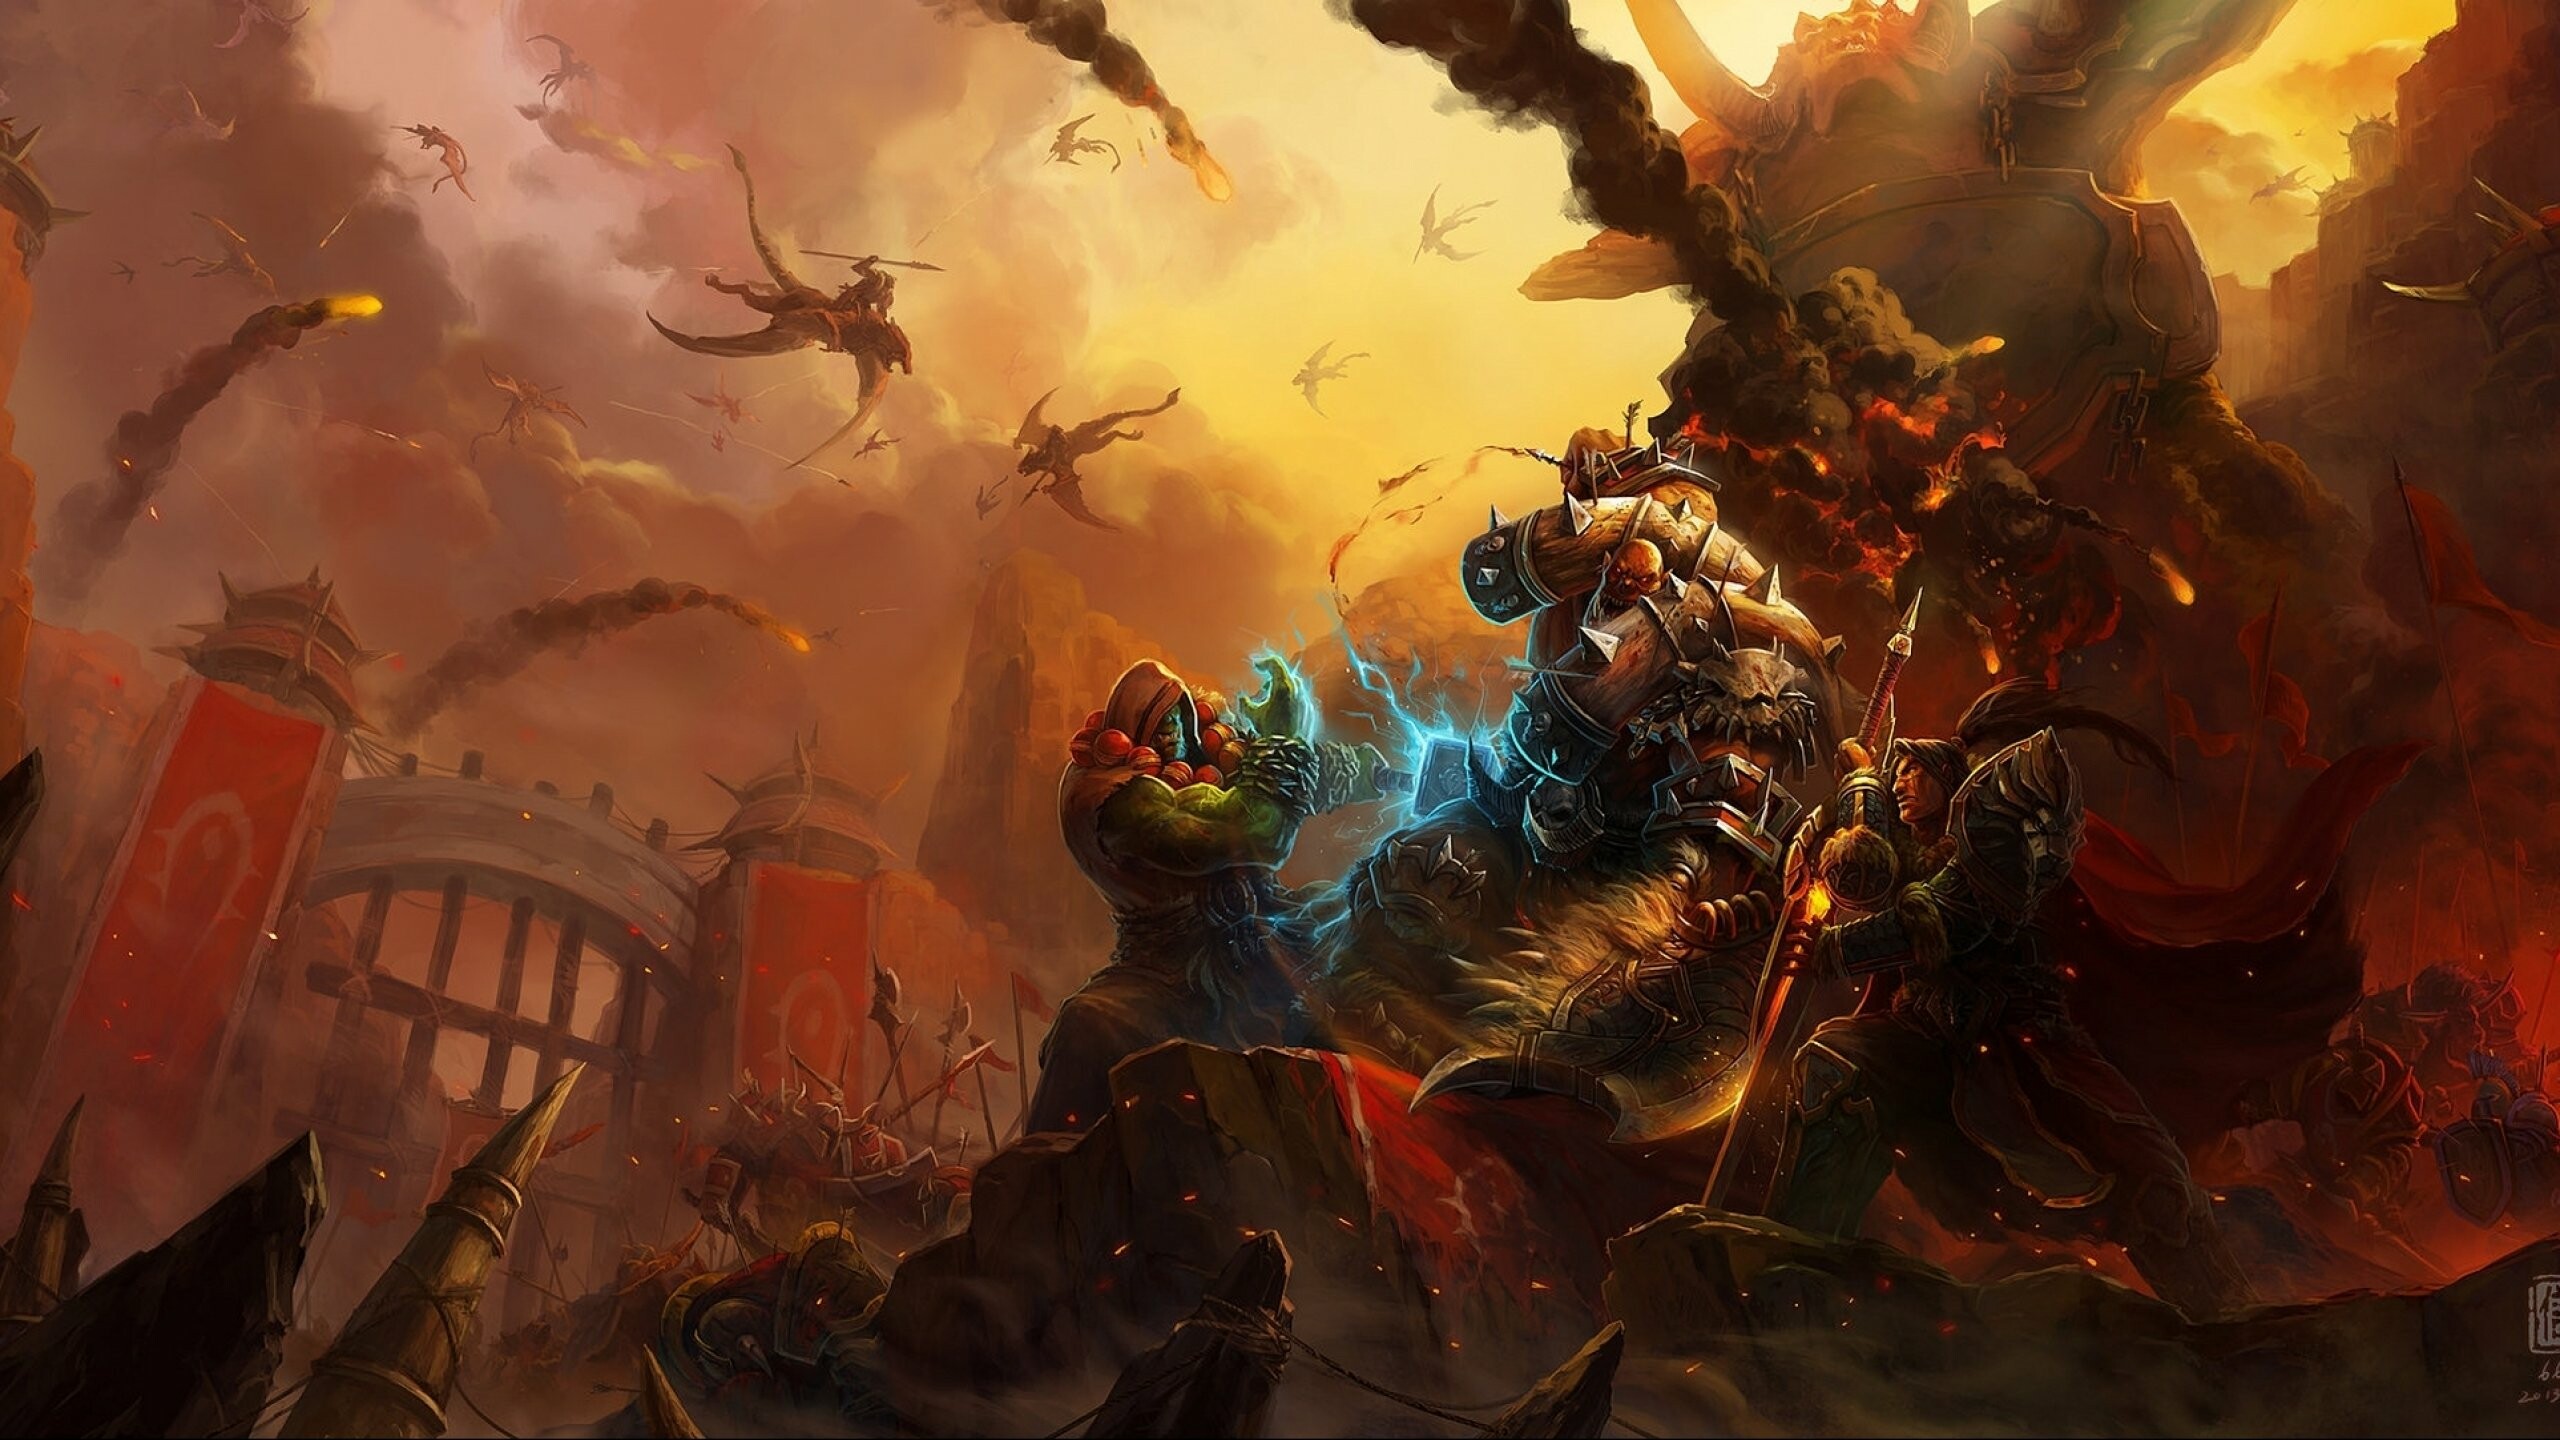 World of Warcraft: Fantasy, Adventure, Artwork, Warrior, The most popular MMORPG of all time. 2560x1440 HD Background.